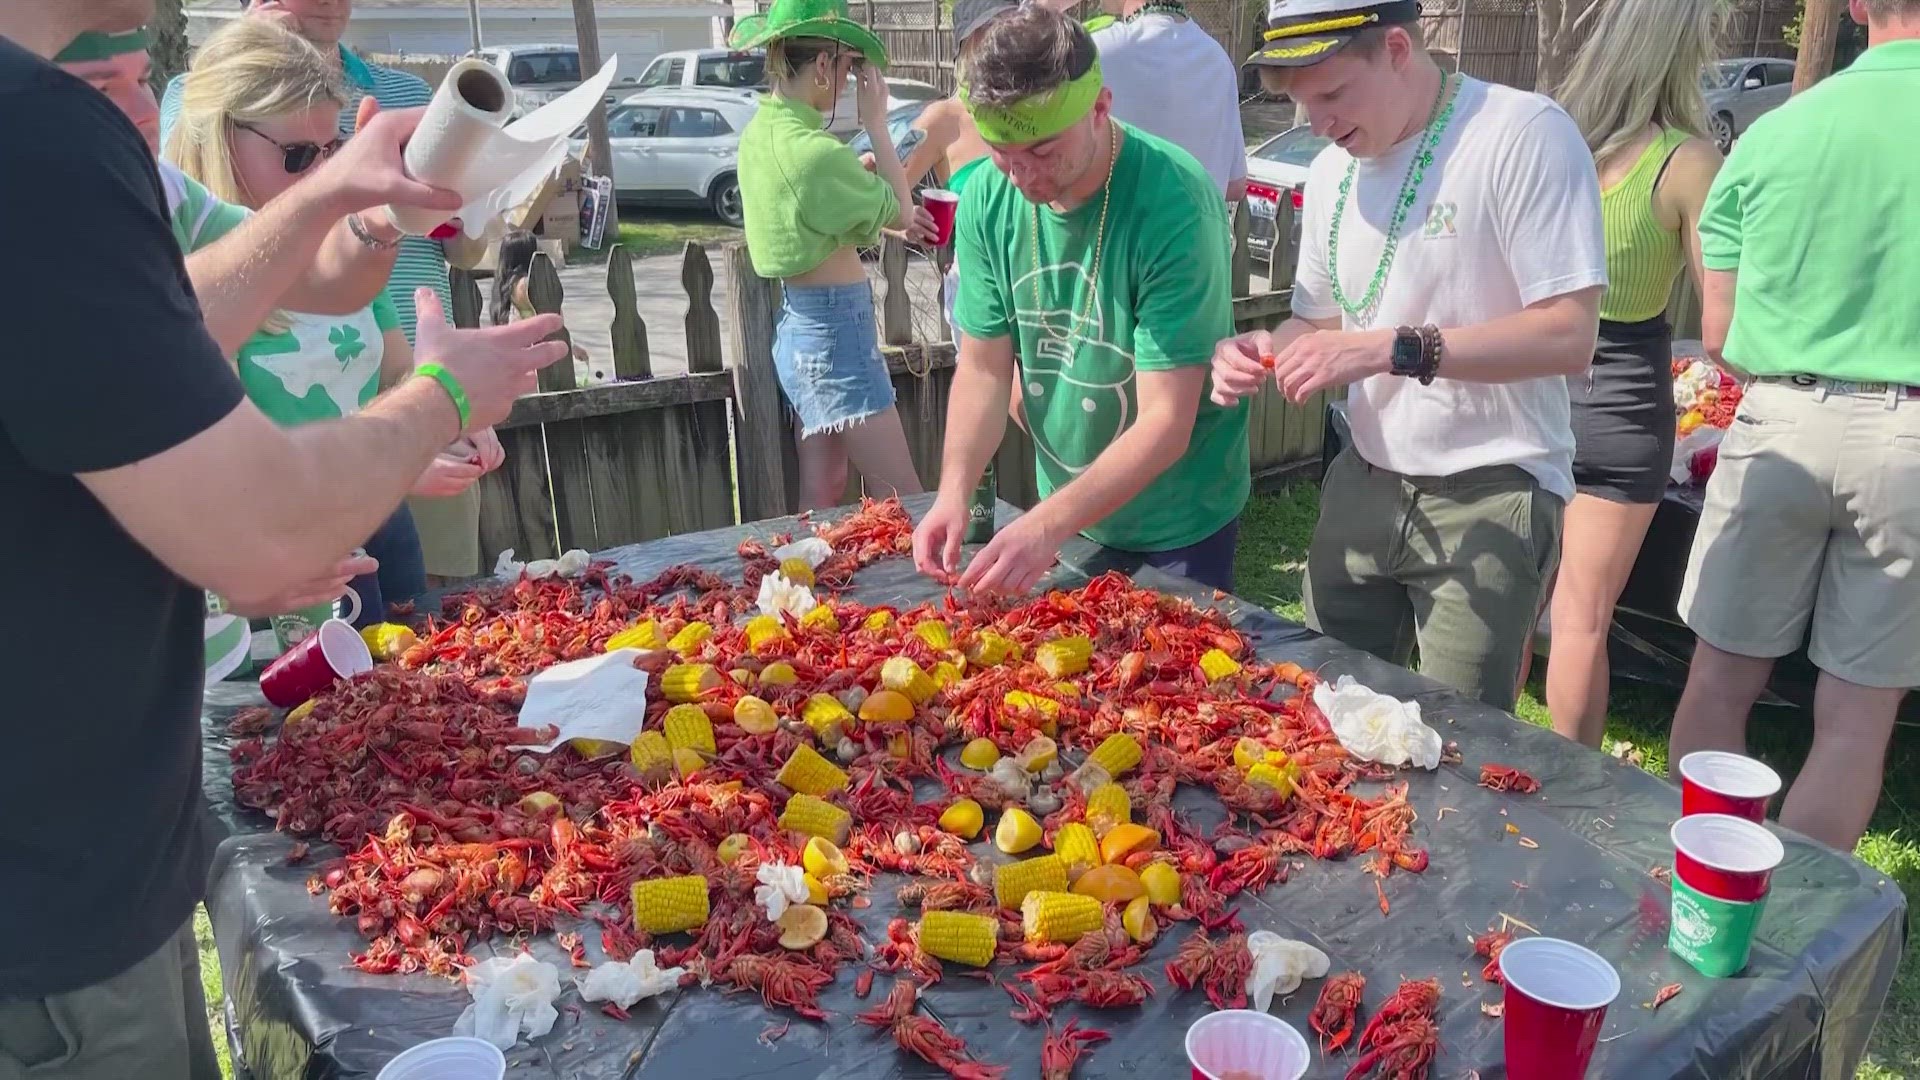 "For us to buy it live and bring it over here is astronomical," David Snell, the owner of Cajun Crawfish Company told WFAA.